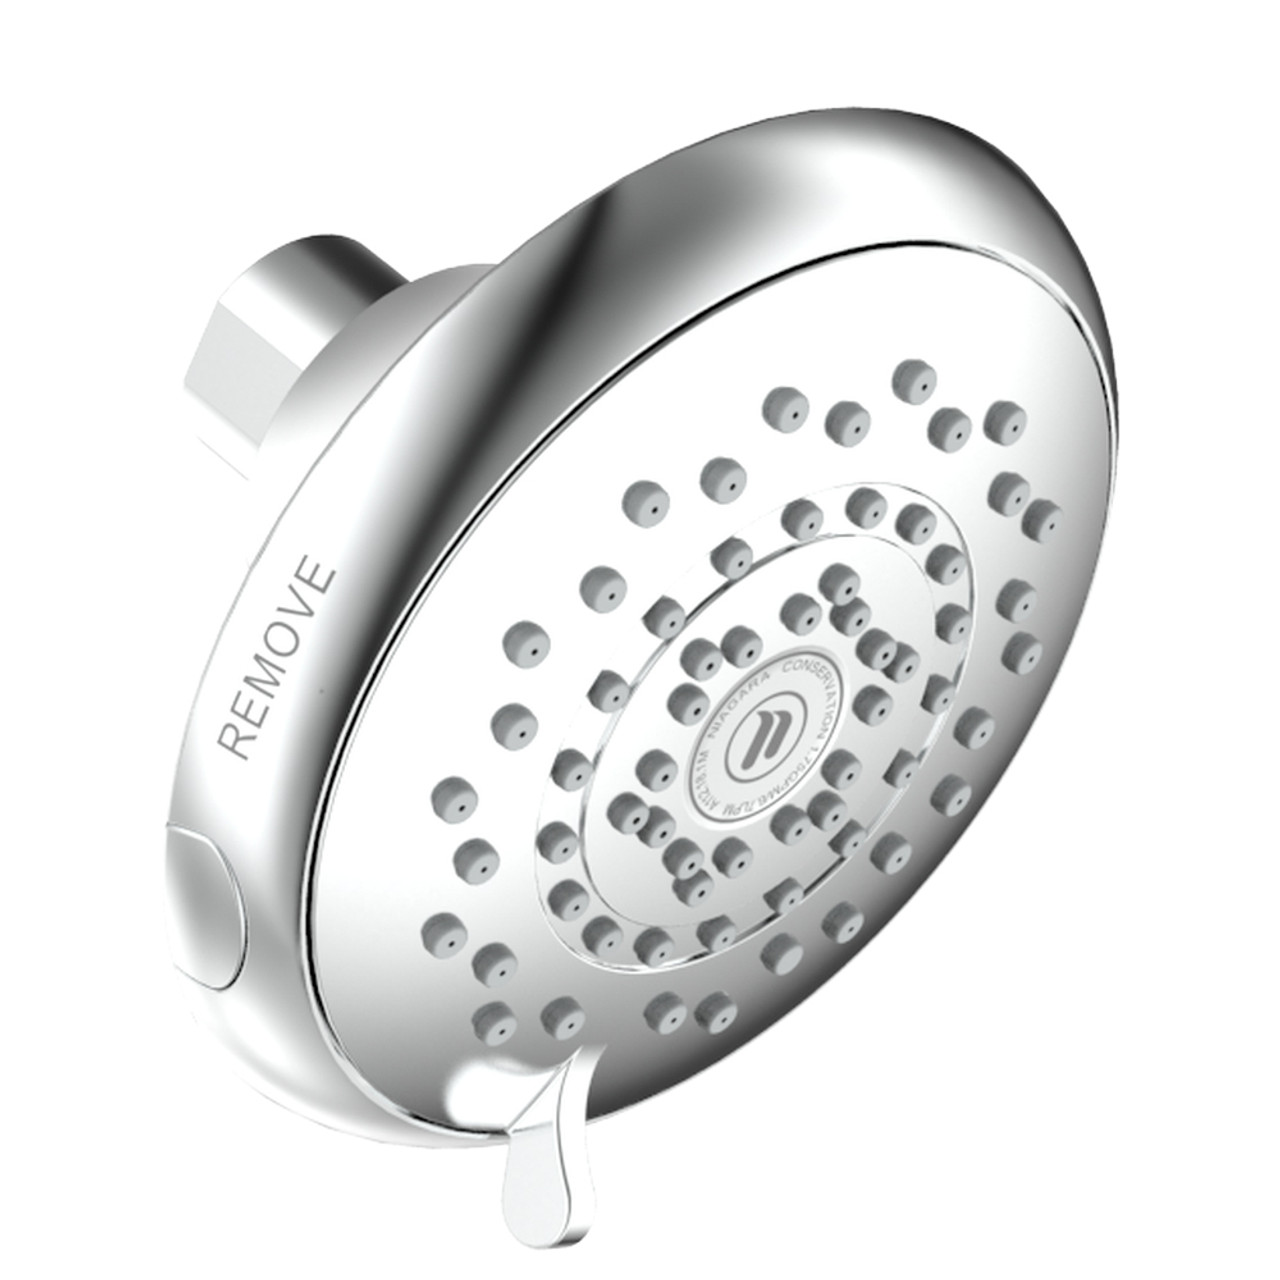 Earth 3-function Fixed Showerhead, Chrome (1.5 gpm)